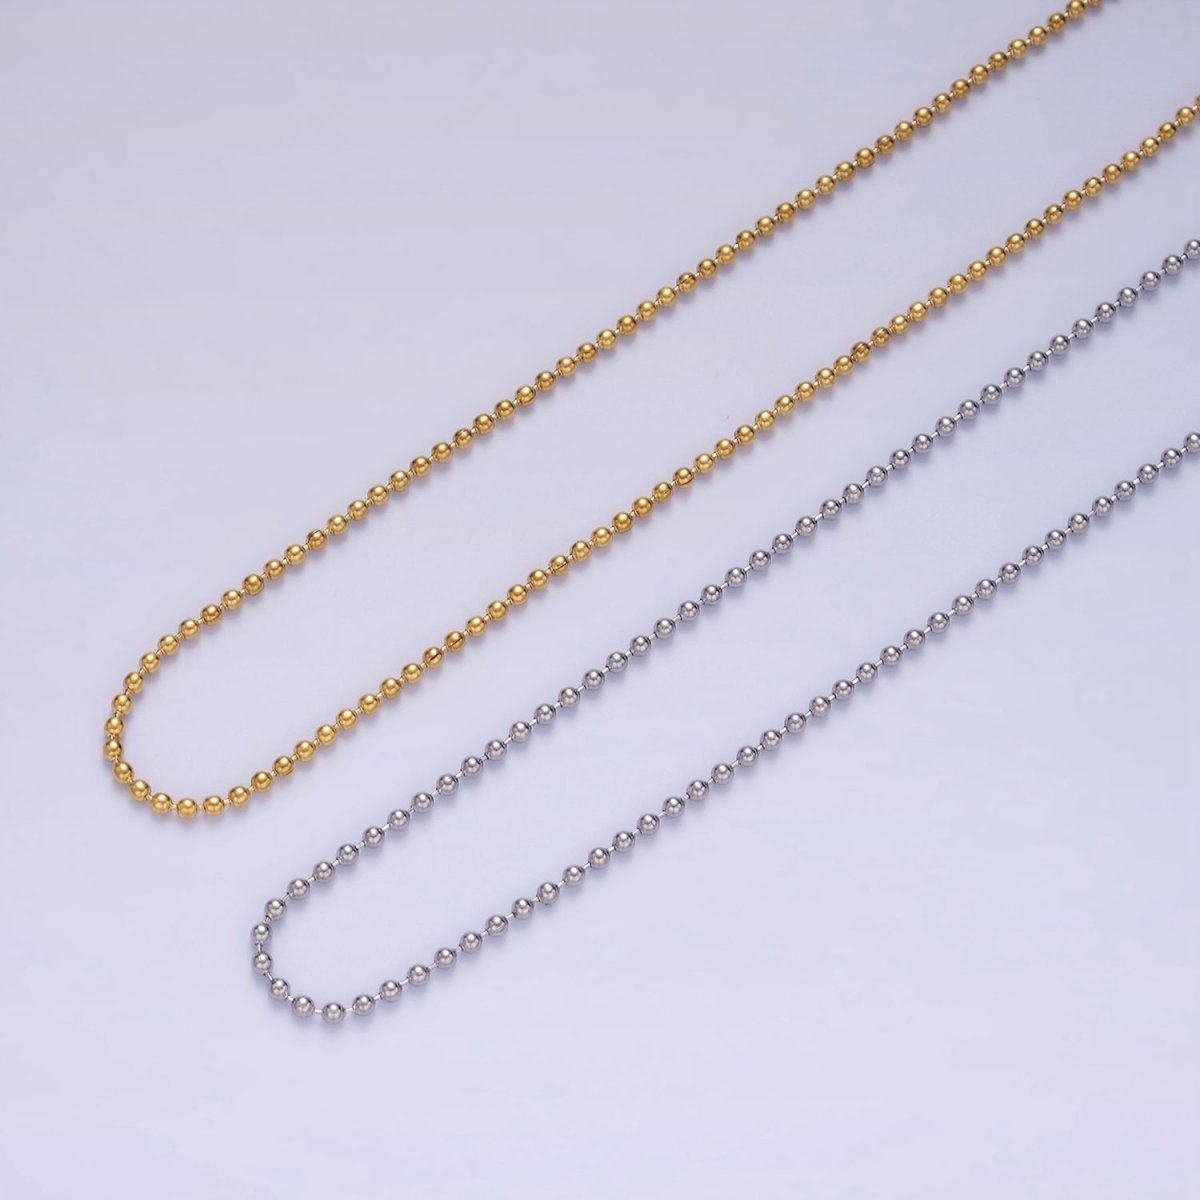 Stainless Steel 1.3mm Bead Chain 18 Inch Necklace w. Extender in Gold & Silver | WA-2480 WA-2481 - DLUXCA